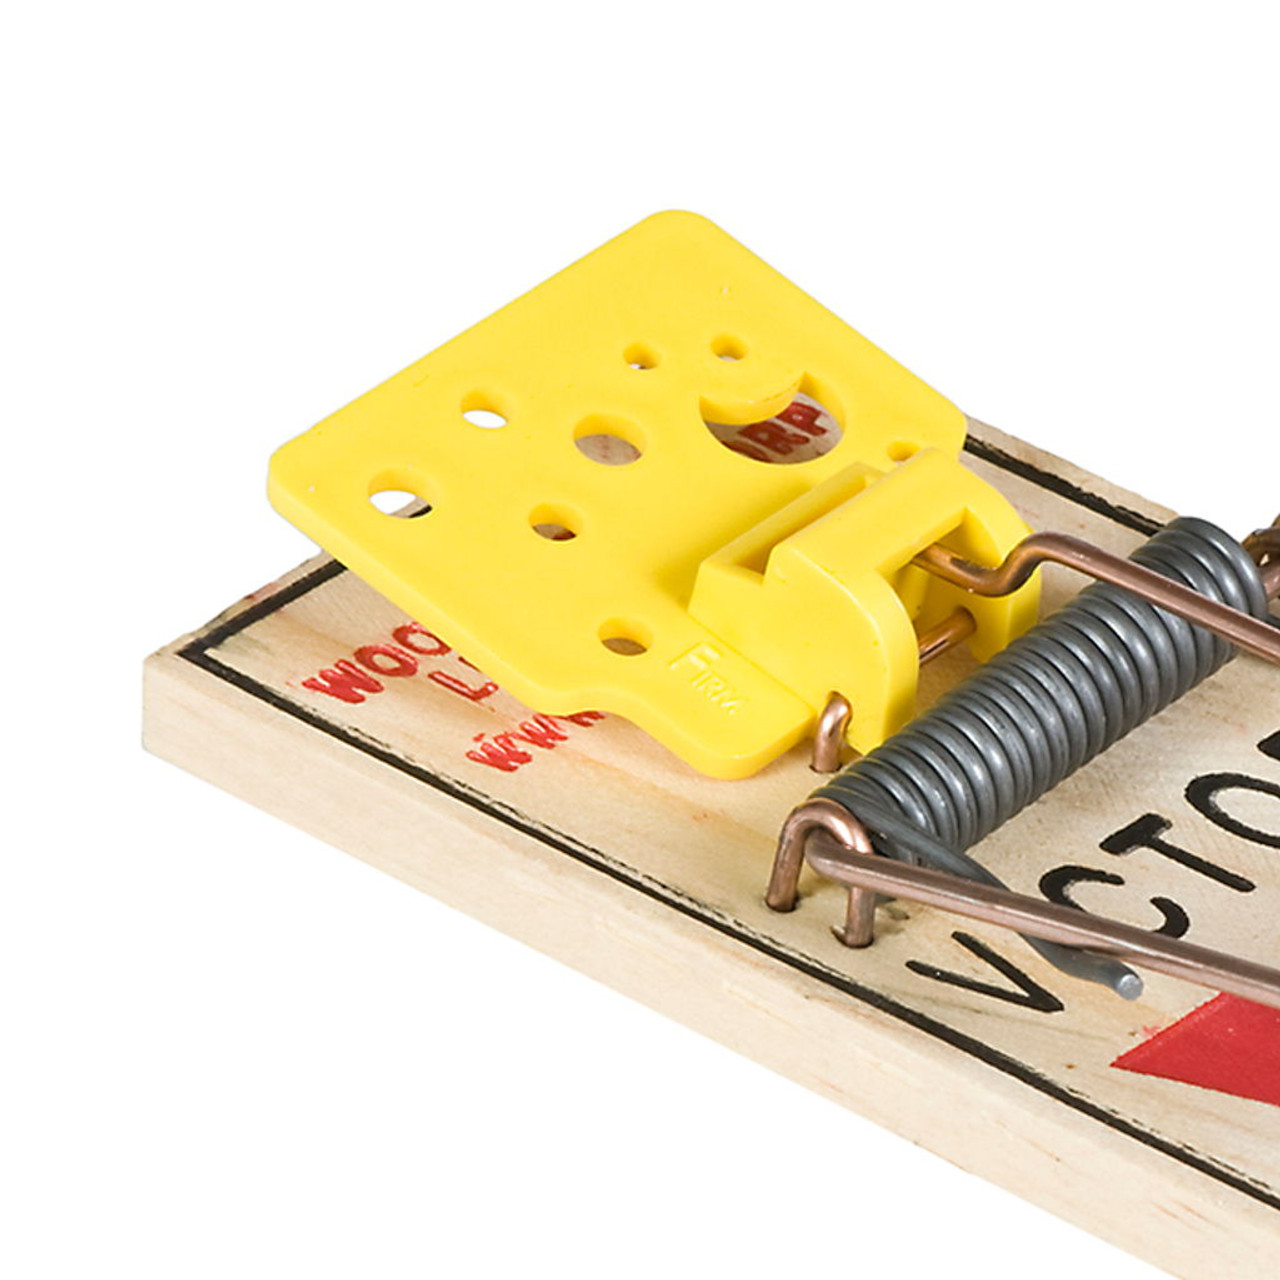 Victor Easy Set Mouse Trap